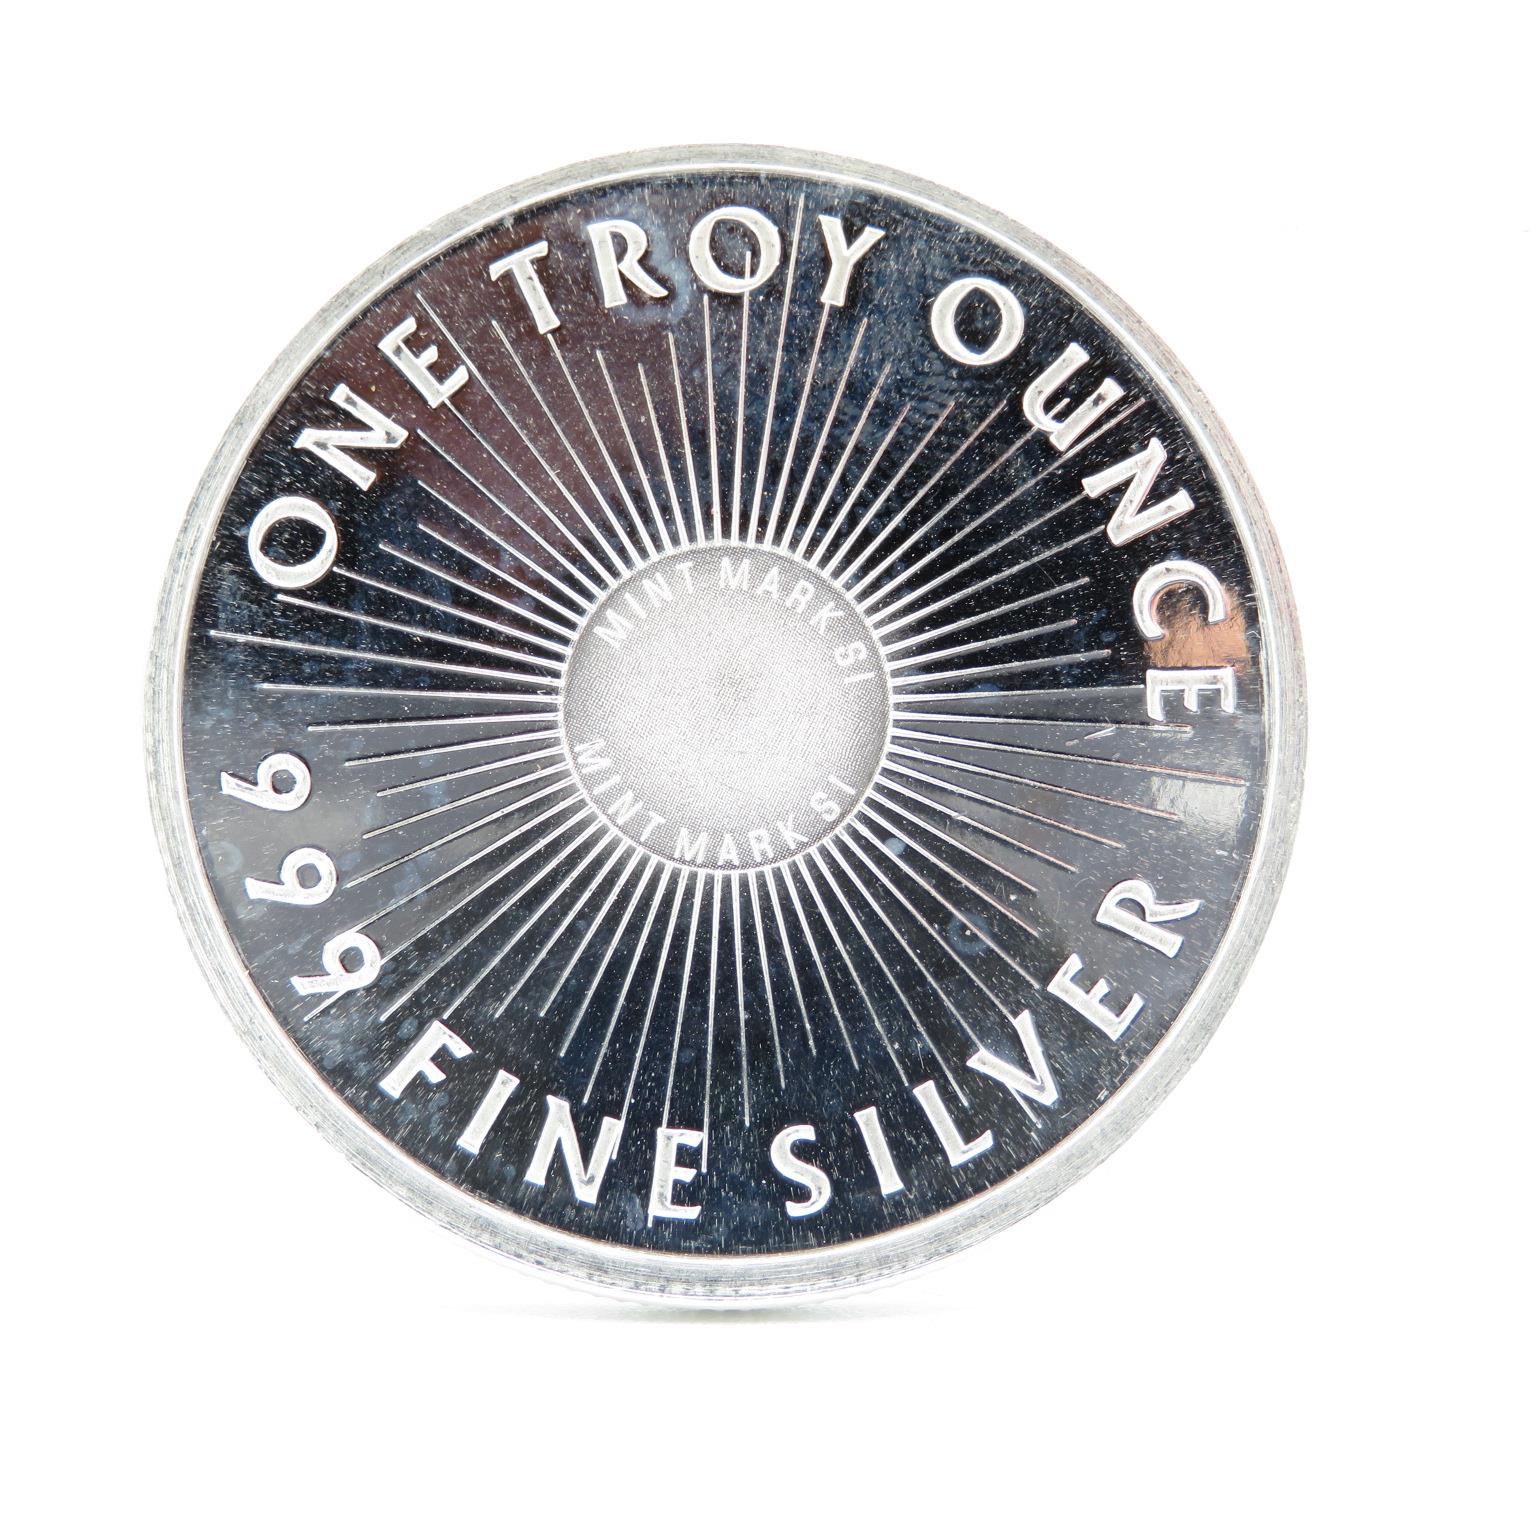 1oz pure silver Sunshine Minting Coin - Image 2 of 2